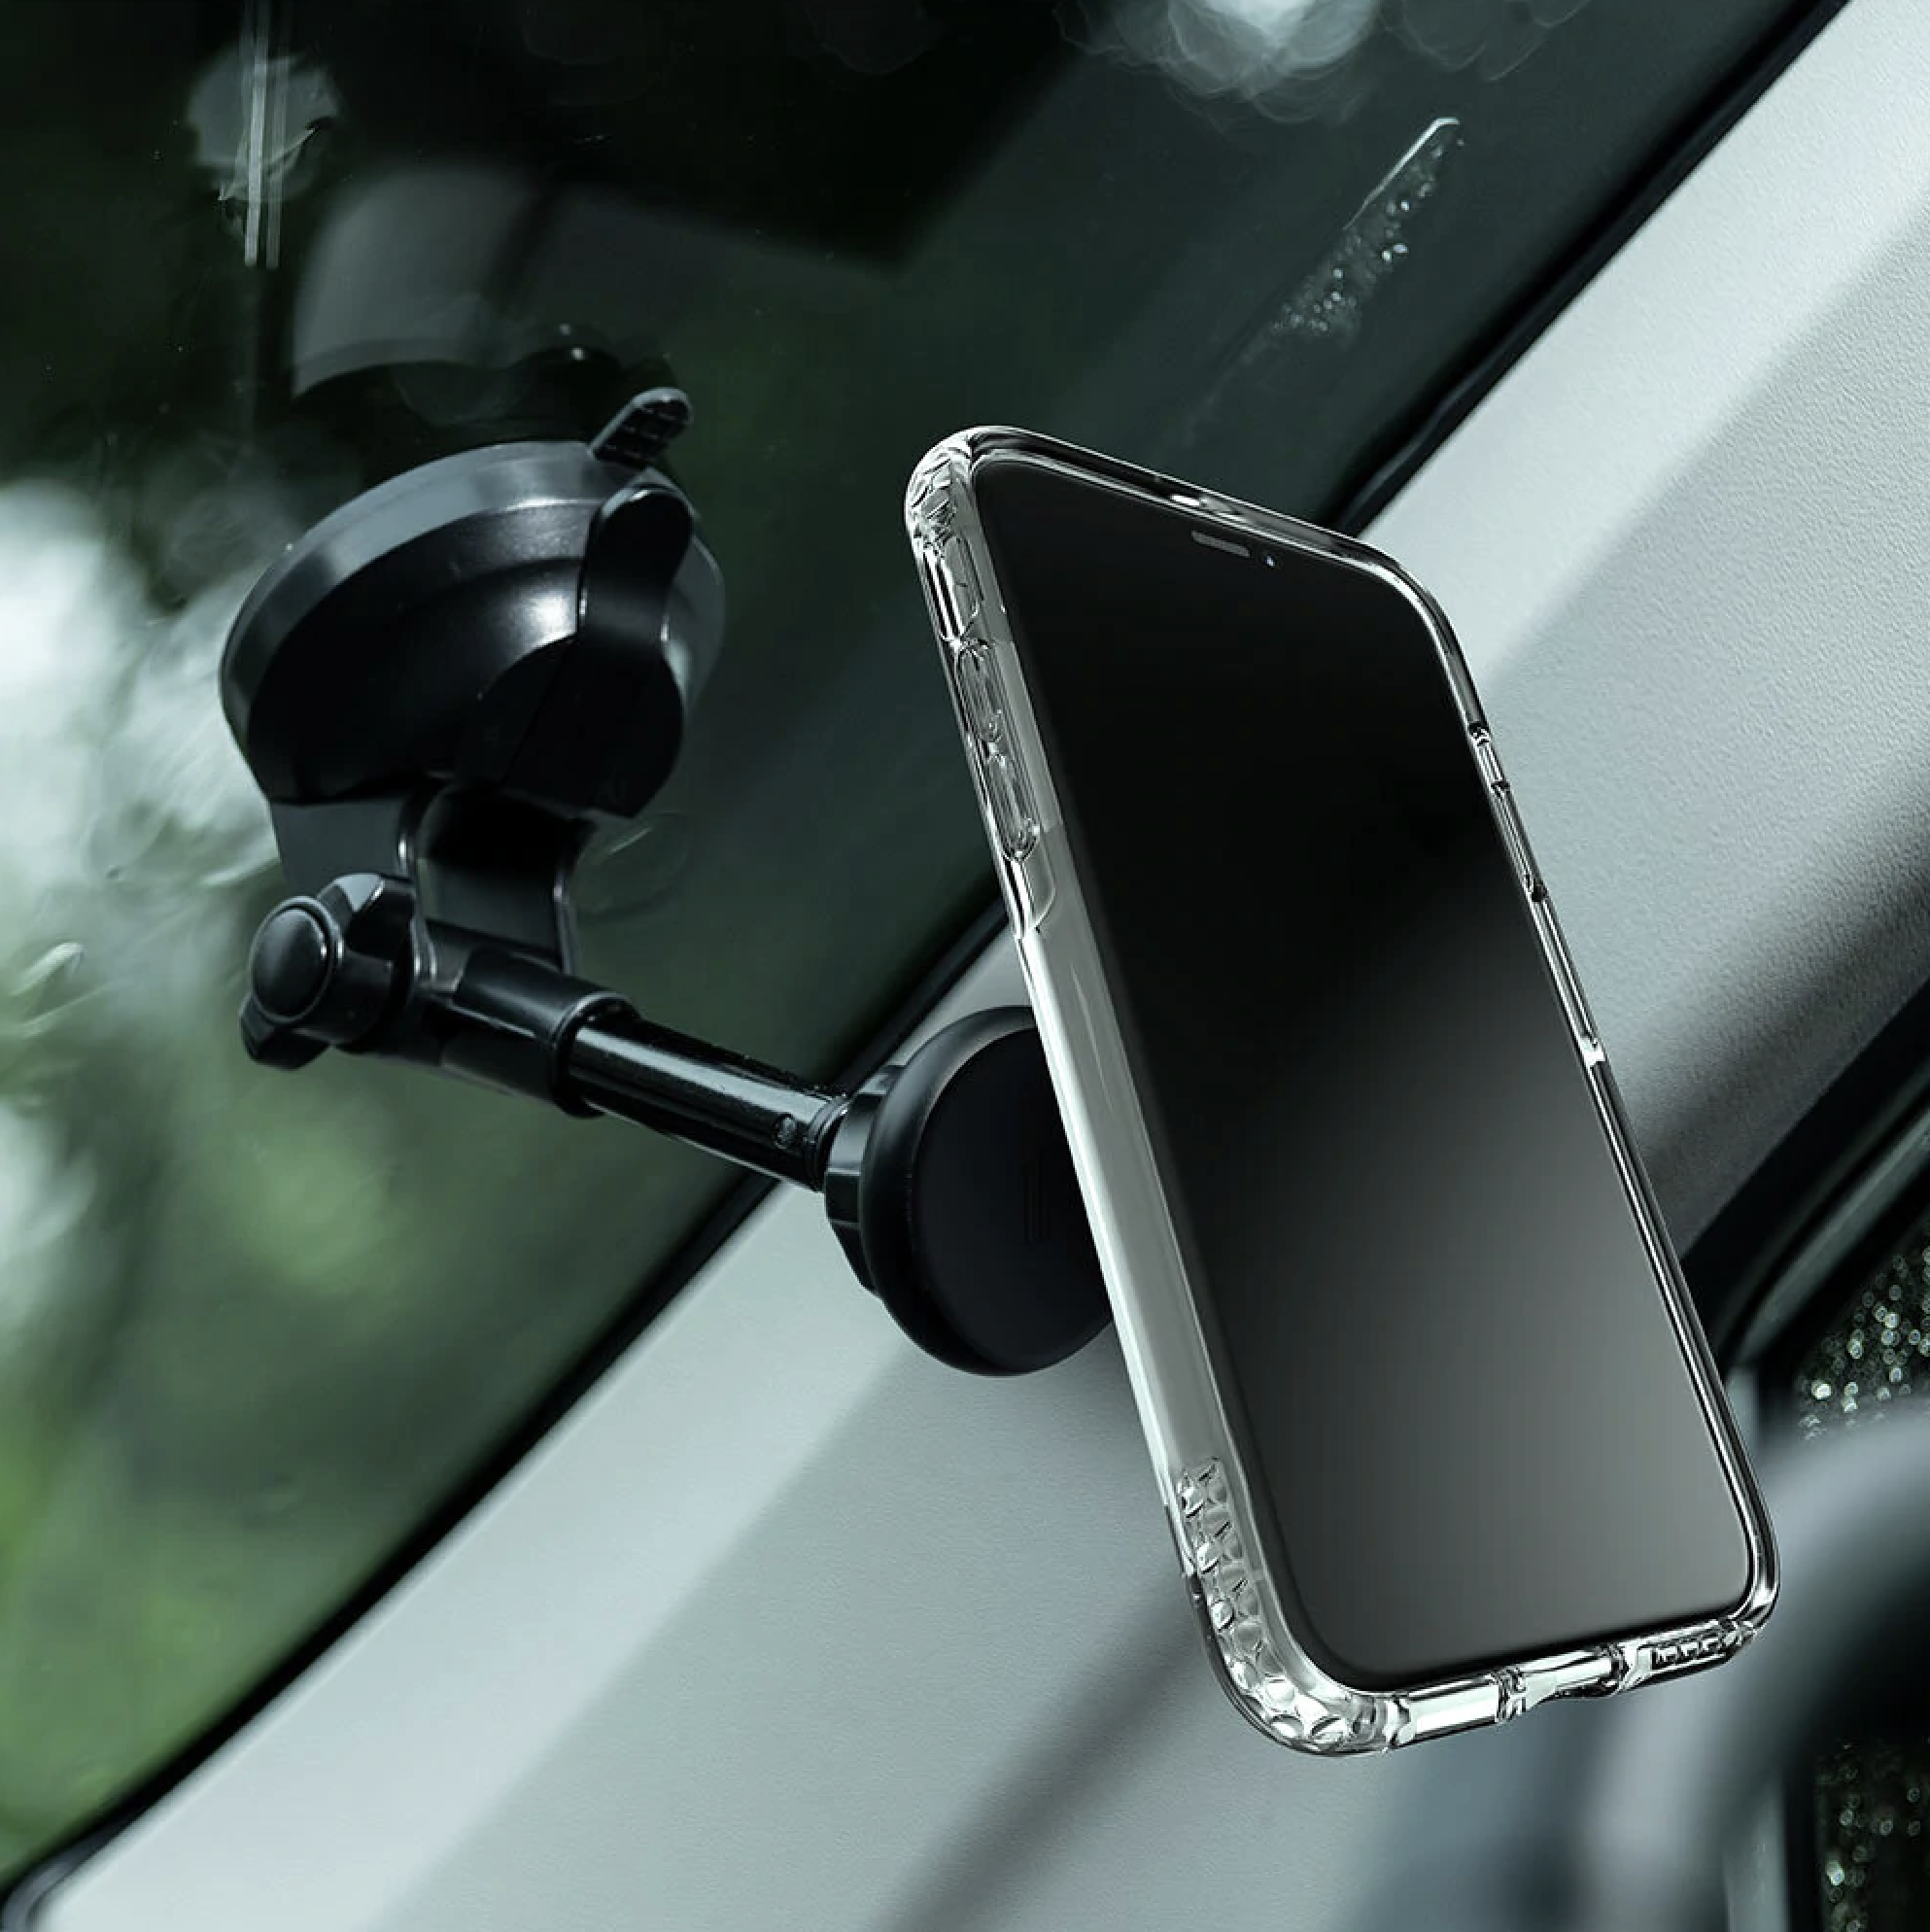 UR Long-Arm Magetic Car Mount [MG-02] [Steady Window Suction Mount]